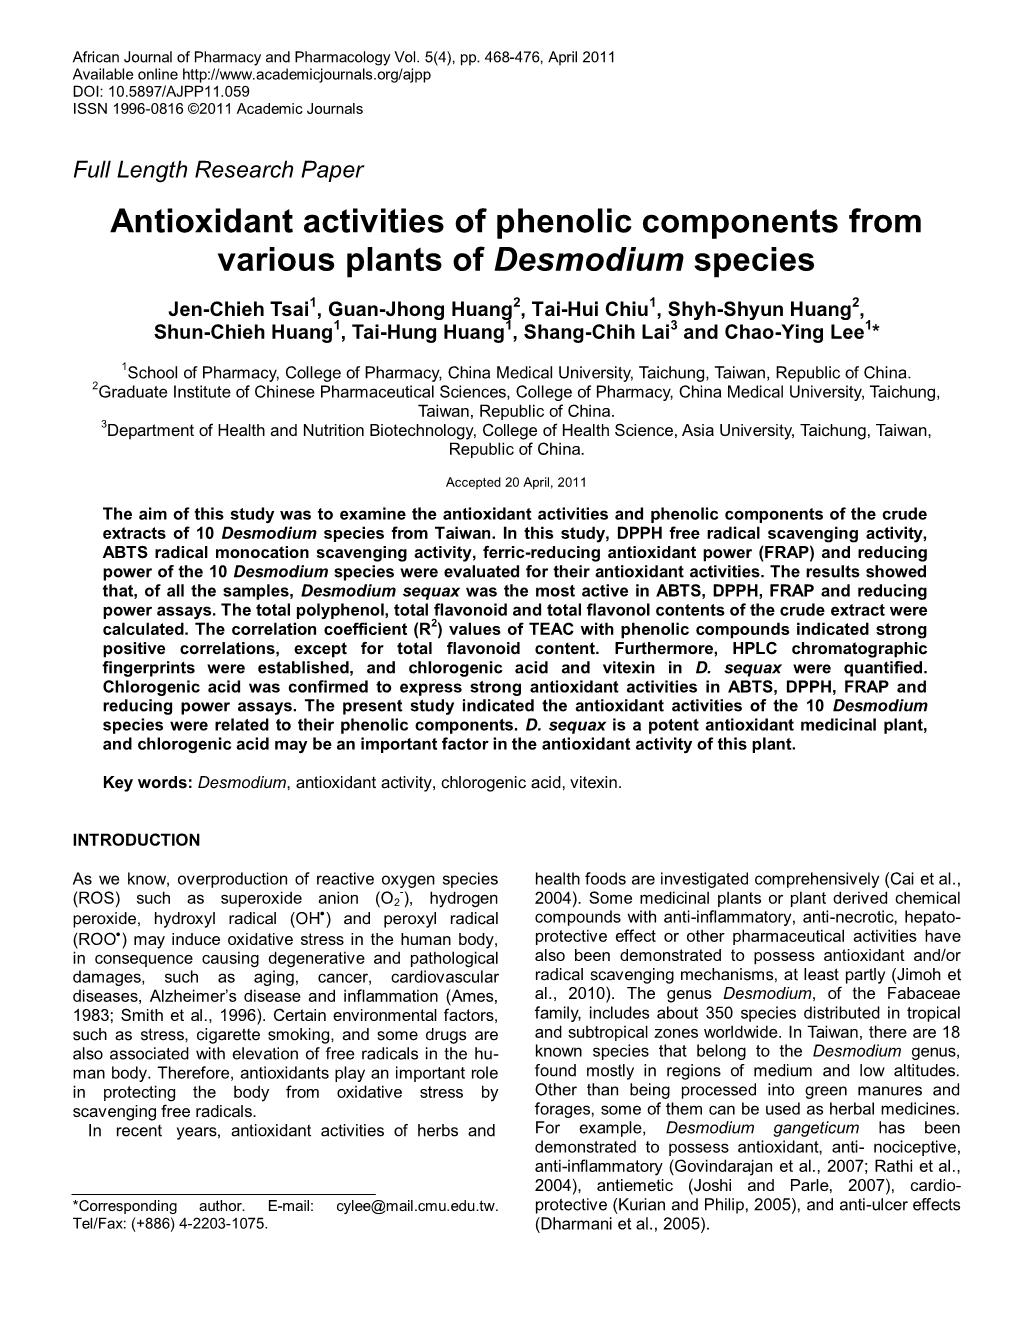 Antioxidant Activities of Phenolic Components from Various Plants of Desmodium Species